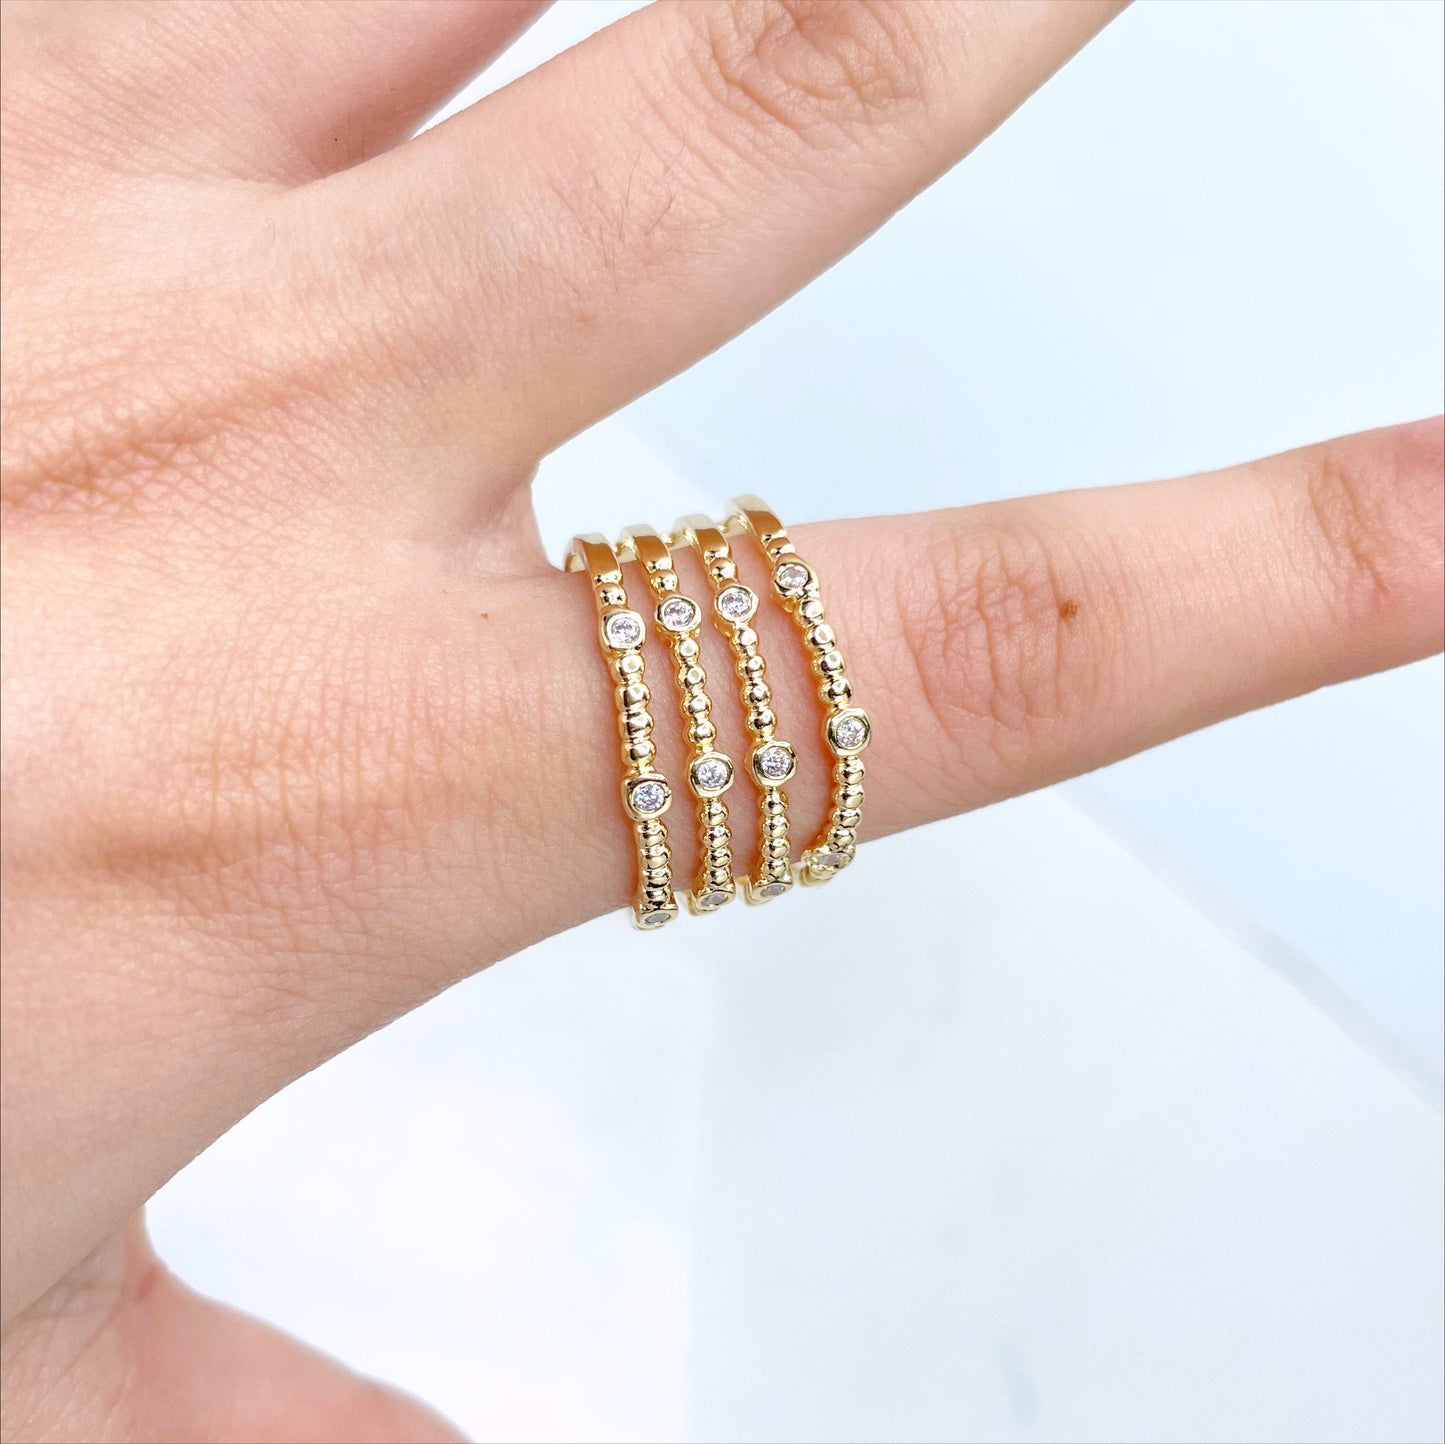 18k Gold Filled Simulated Stacking Ring Featuring with Micro Cubic Zirconia, Wholesale Jewelry Making Supplies